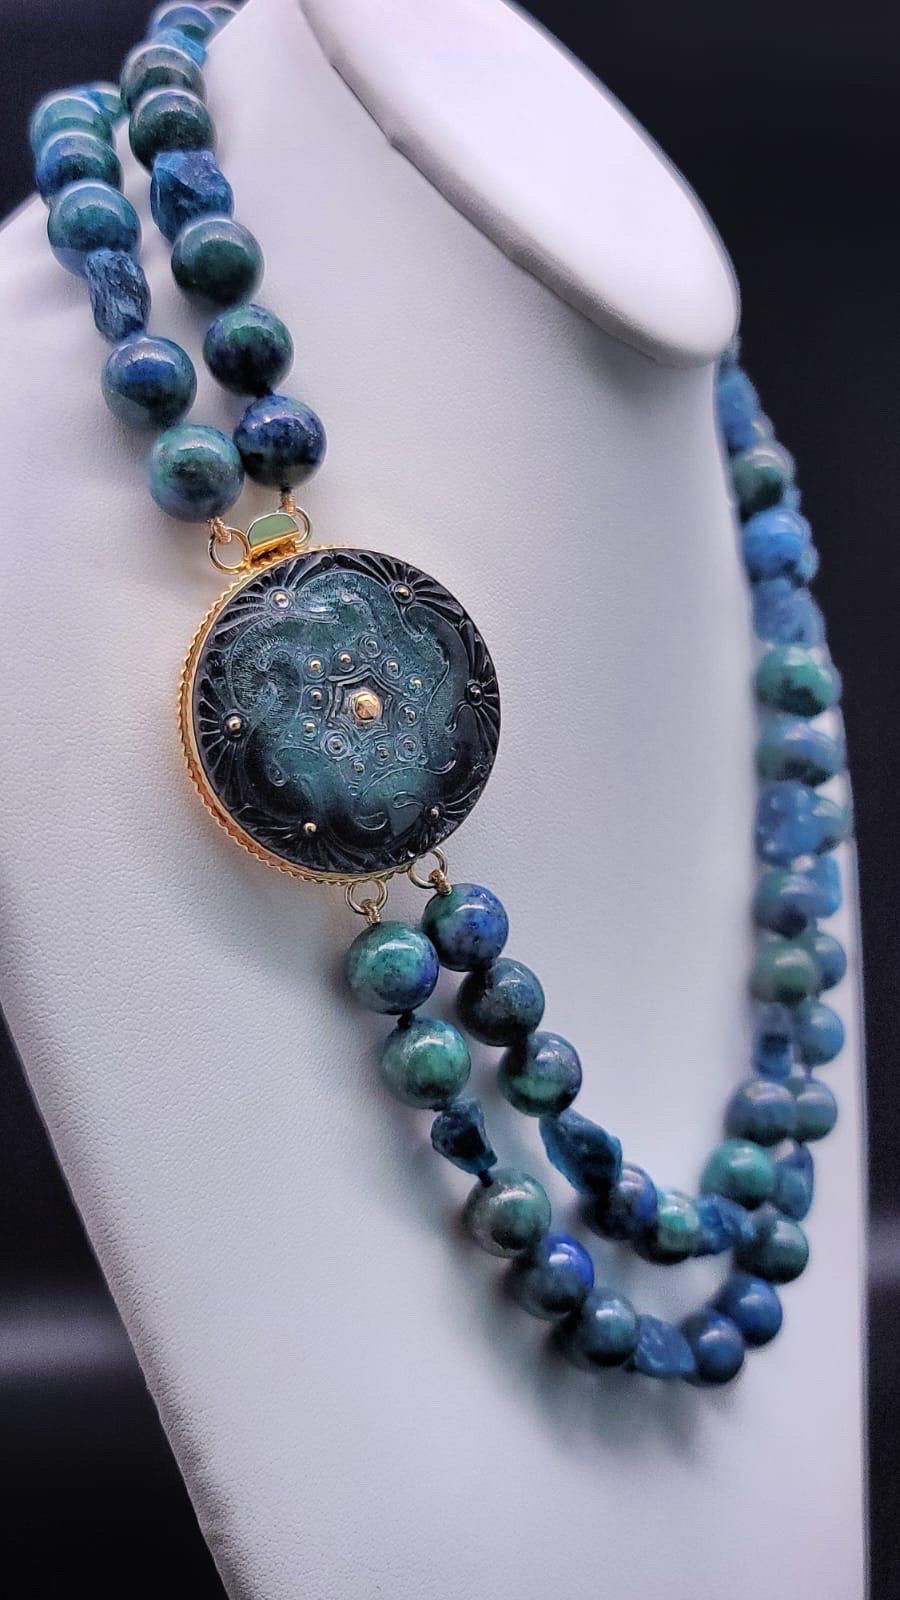 One-of-a-Kind

A mixture of nature's best blue/green stones Chrysacolla and Apatite. The 12 m.m. Polished Chrysocolla is interrupted by nuggets of rough-cut Apatite. A slightly more porous and therefore light-reflecting bead. The side-clasp of